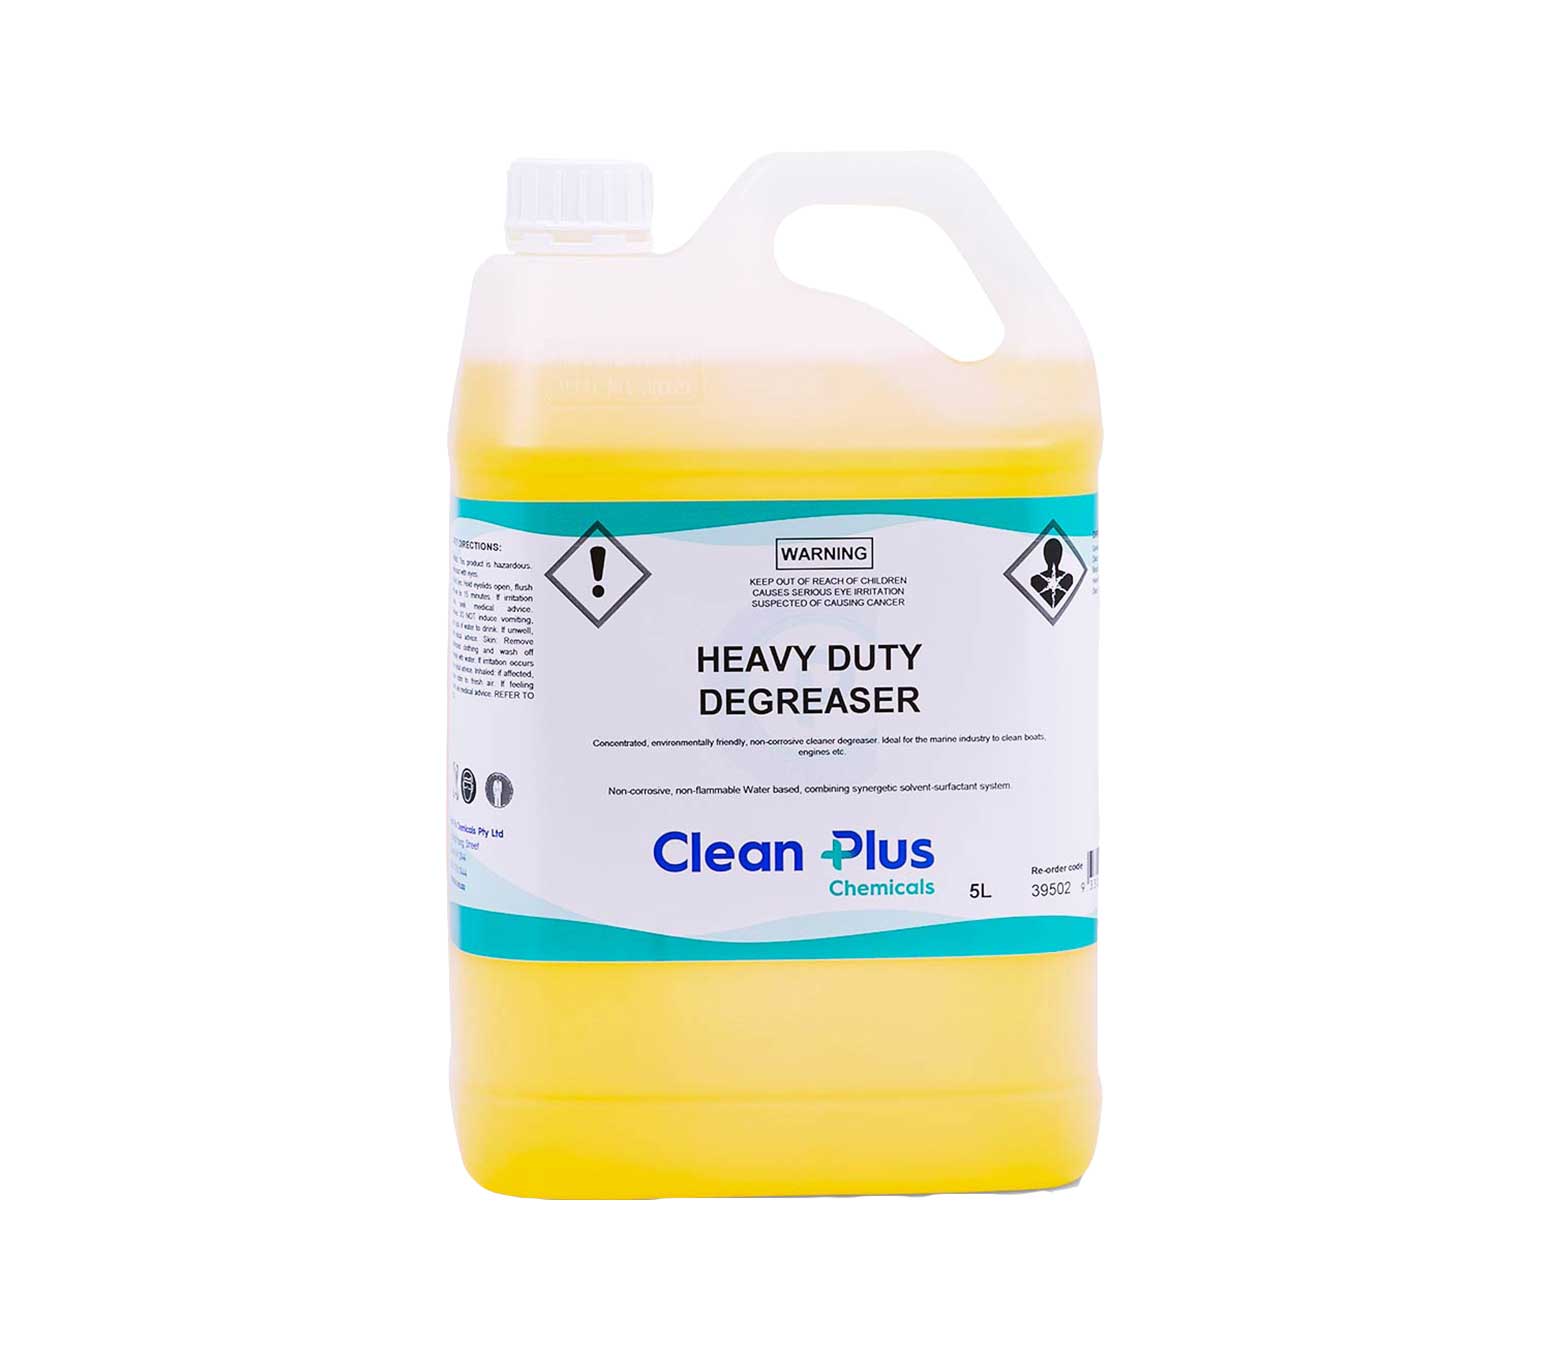 Heavy Duty Degreaser - Concentrated, non-corrosive cleaner degreaser.